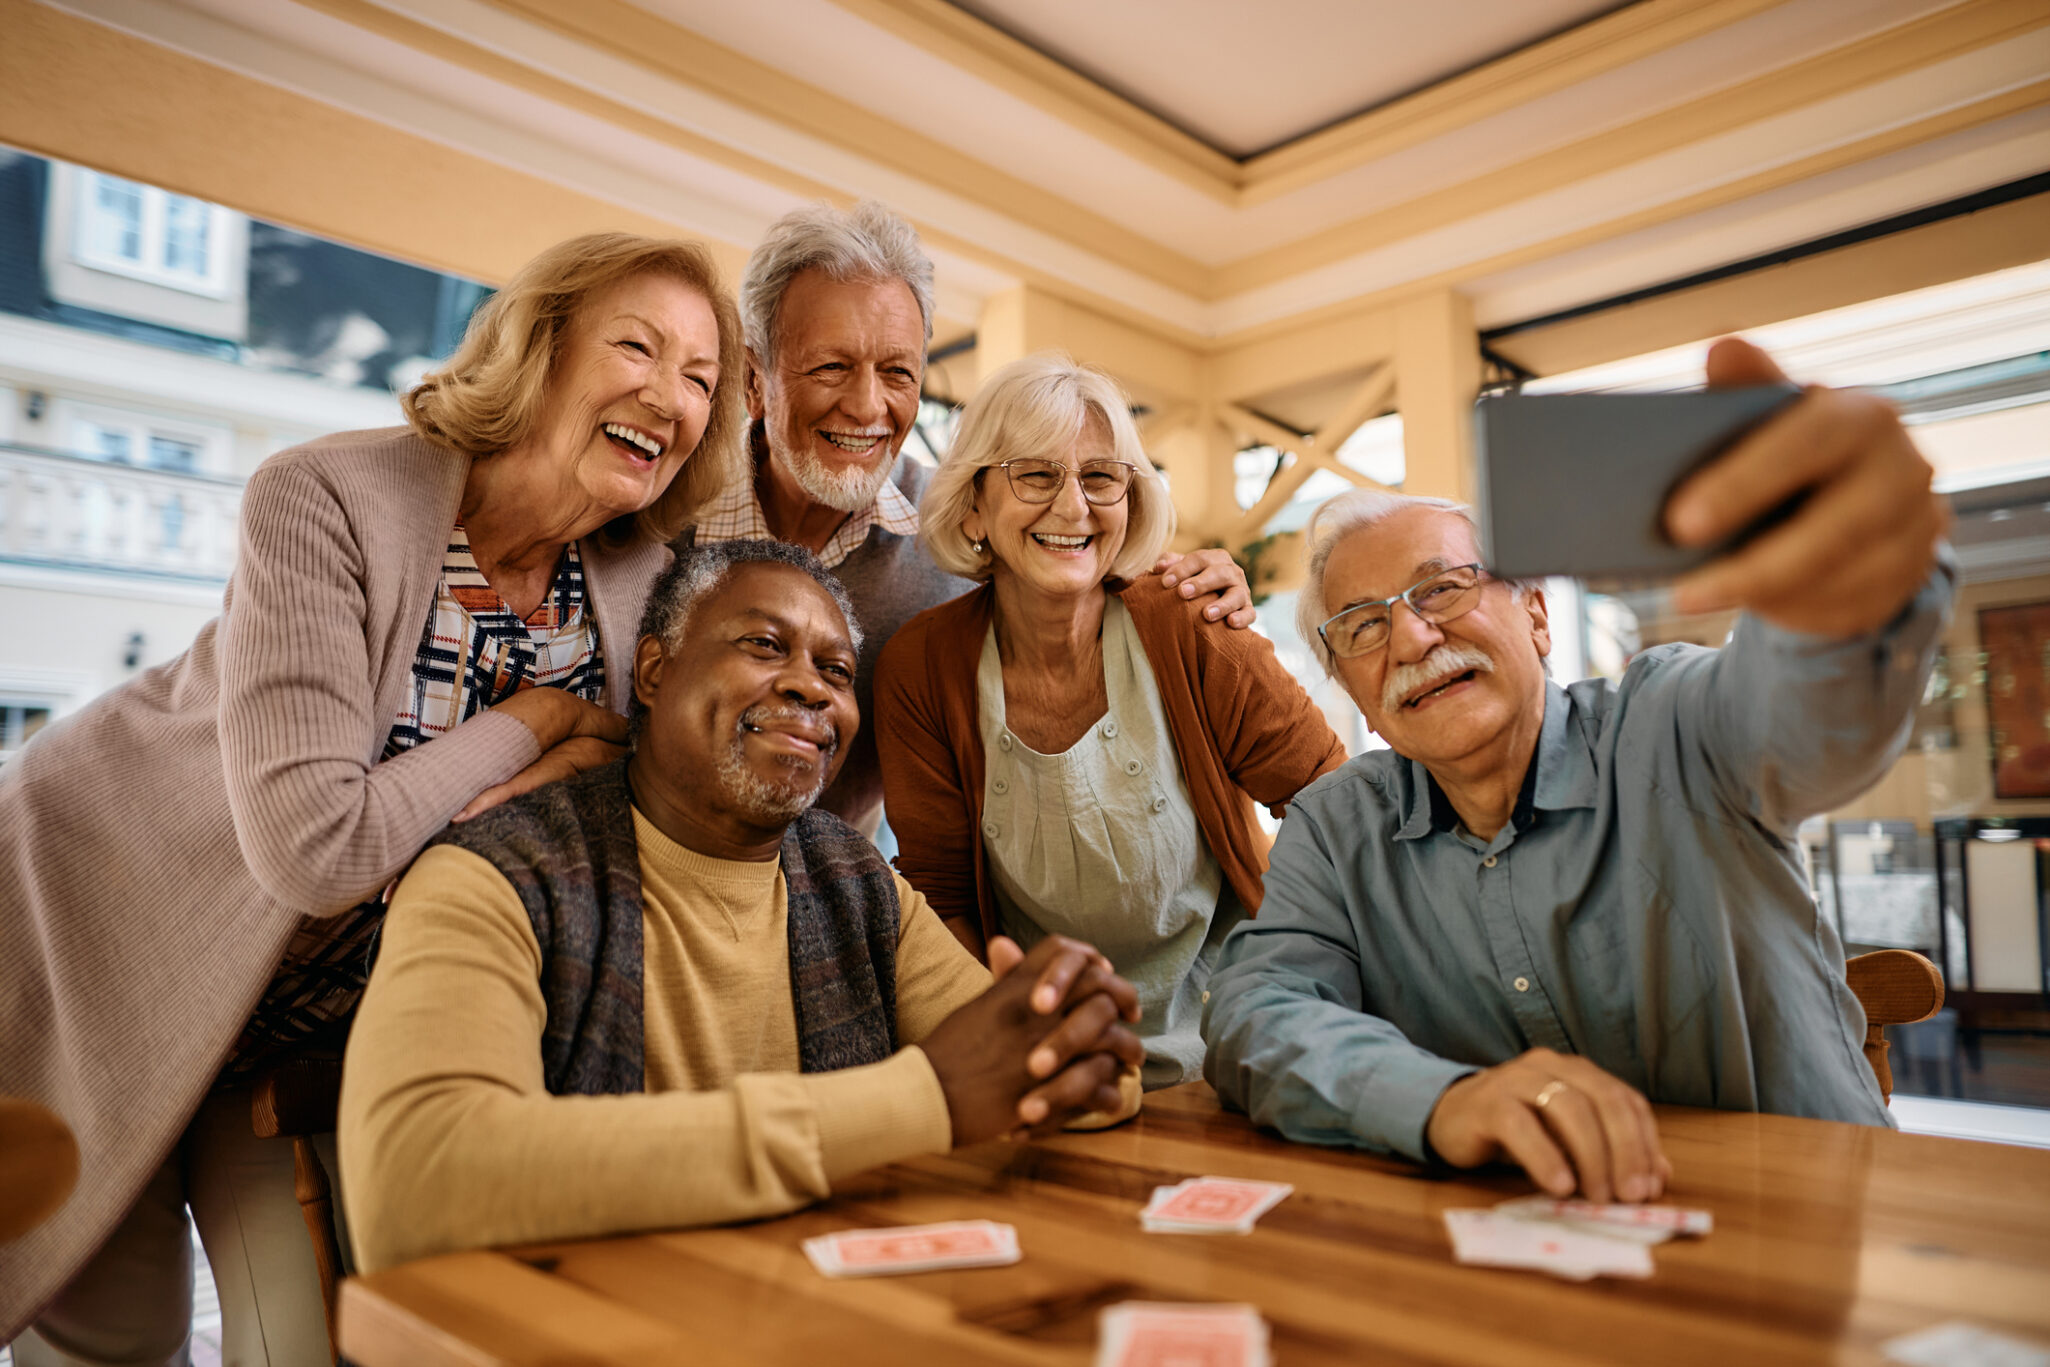 A group of older adults smiling for a group selfie